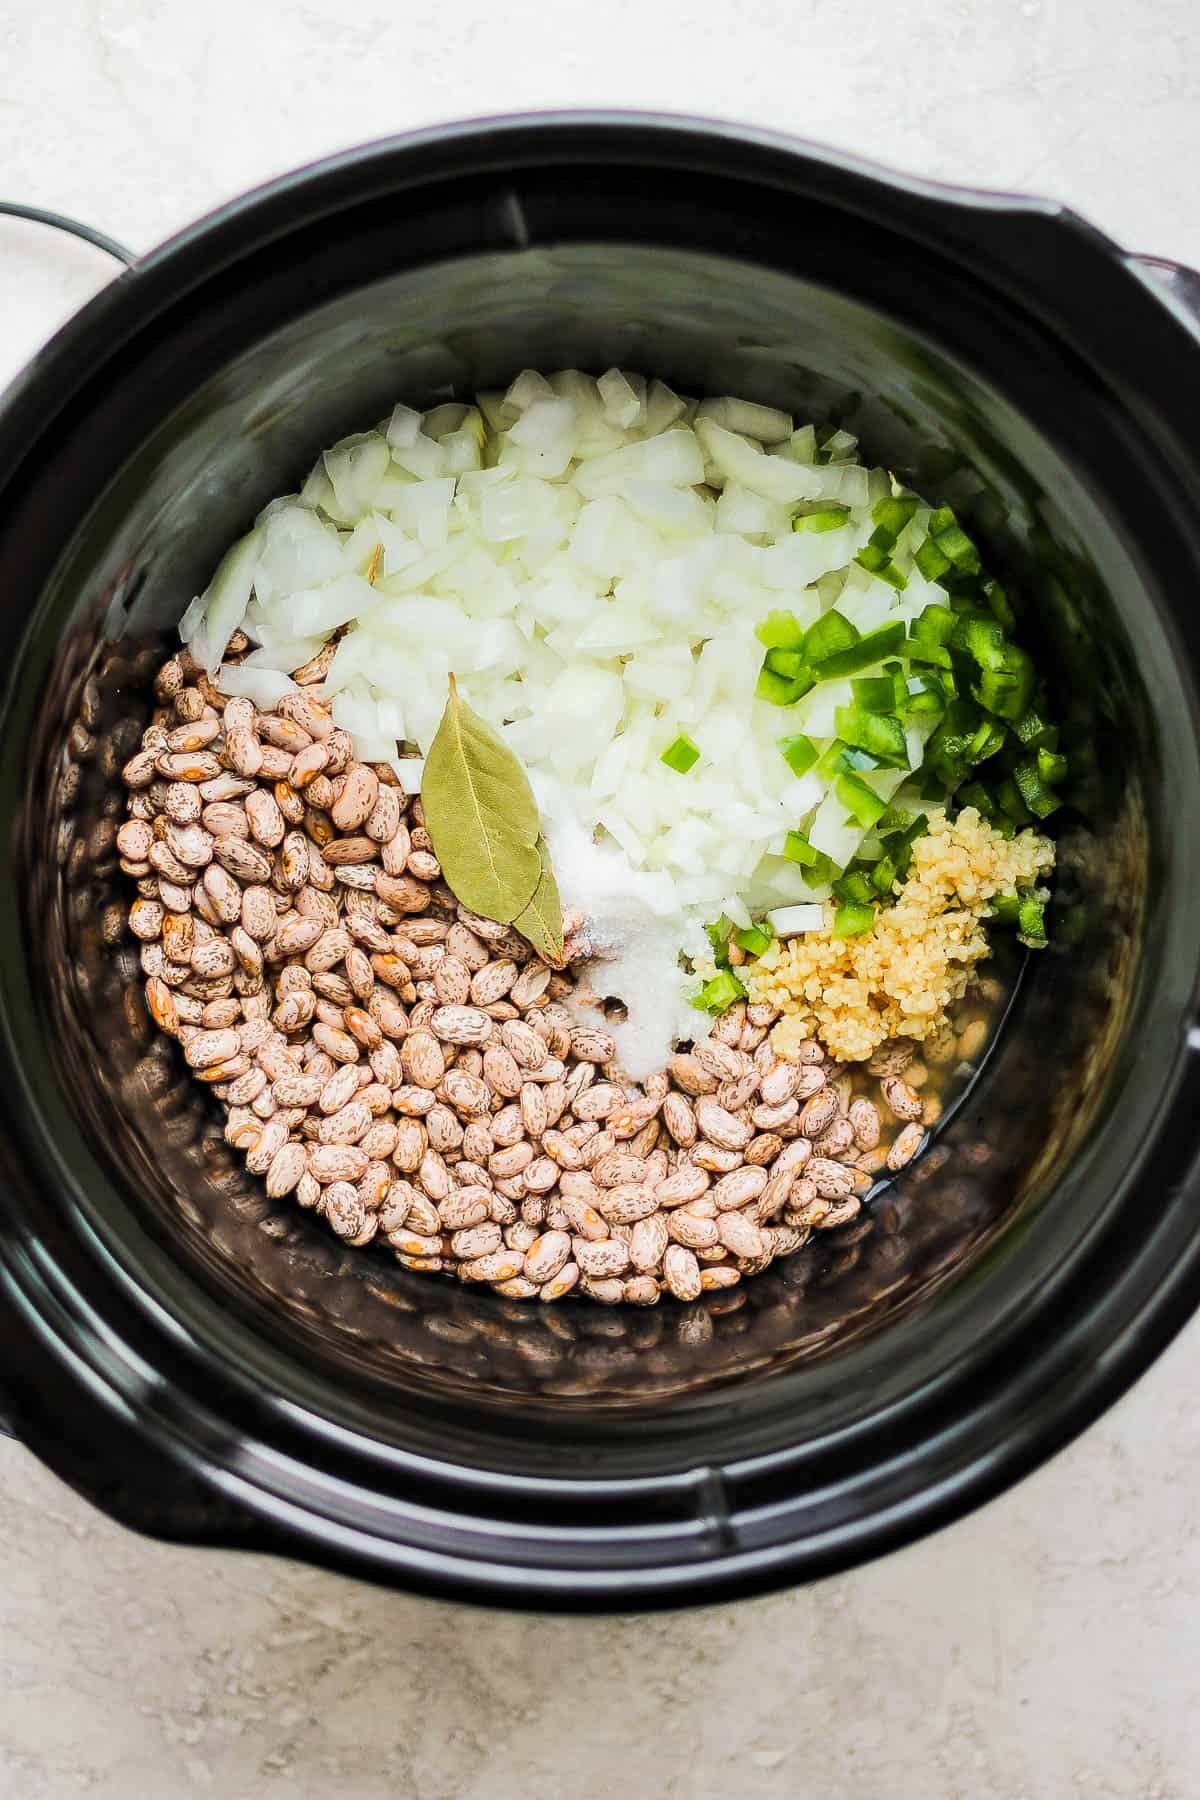 Ingredients for crock pot pinto beans in a slow cooker.